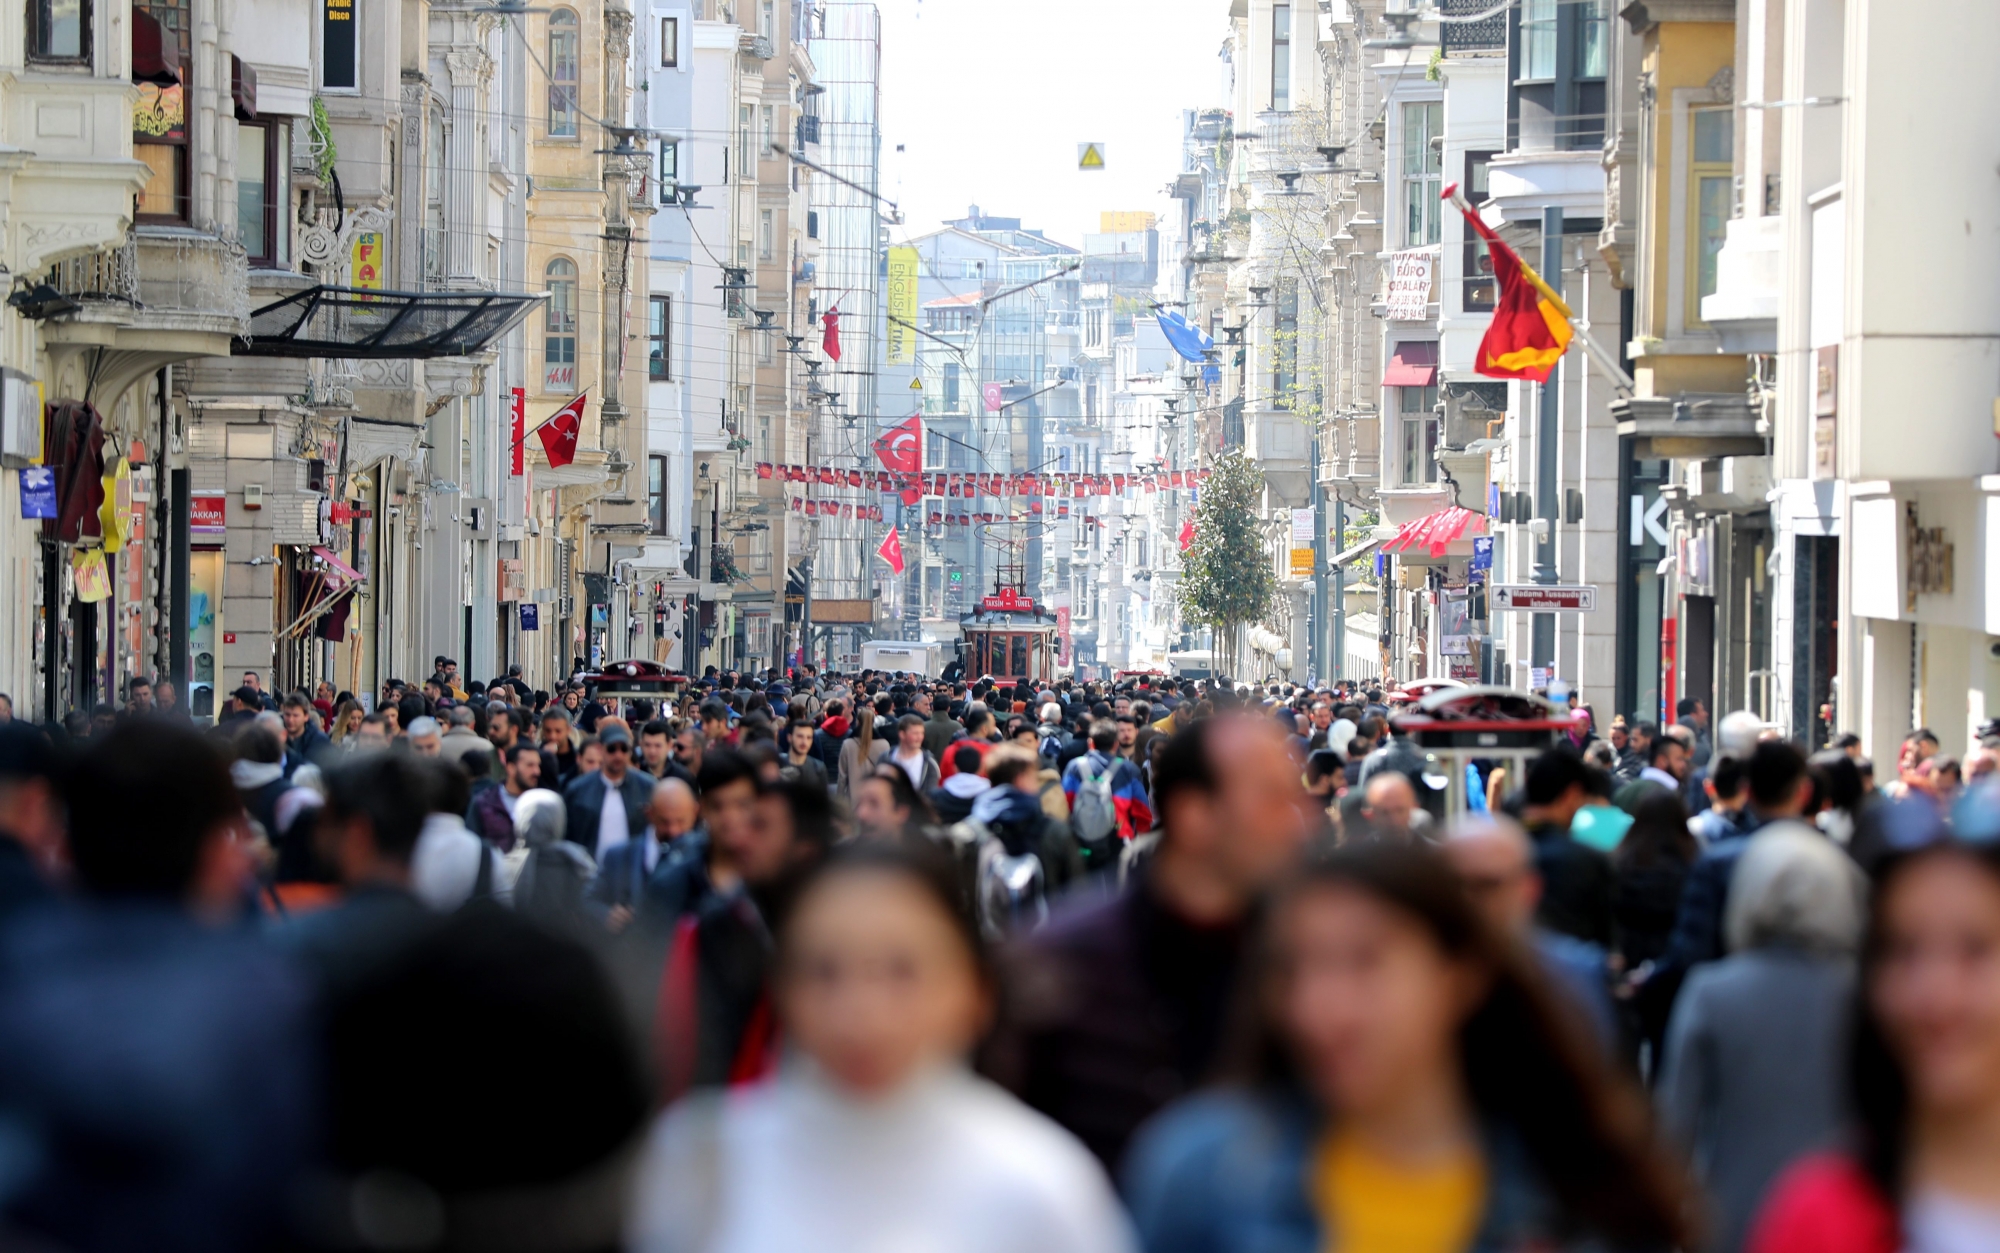 epa07478173 People walk at Istiklal Street in Istanbul, Turkey, 01 April 2019. According to media reports, Supreme Election Board (YSK) chairman said on 01 April Turkey's opposition Republican People's Party (CHP) candidate for Istanbul mayor Ekrem Imamoglu is leading by nearly 28,000 votes after the local election. Some 57 million people voted in local elections in Turkey's capital and the country's overall 81 provinces.  EPA/TOLGA BOZOGLU TURKEY LOCAL ELECTIONS